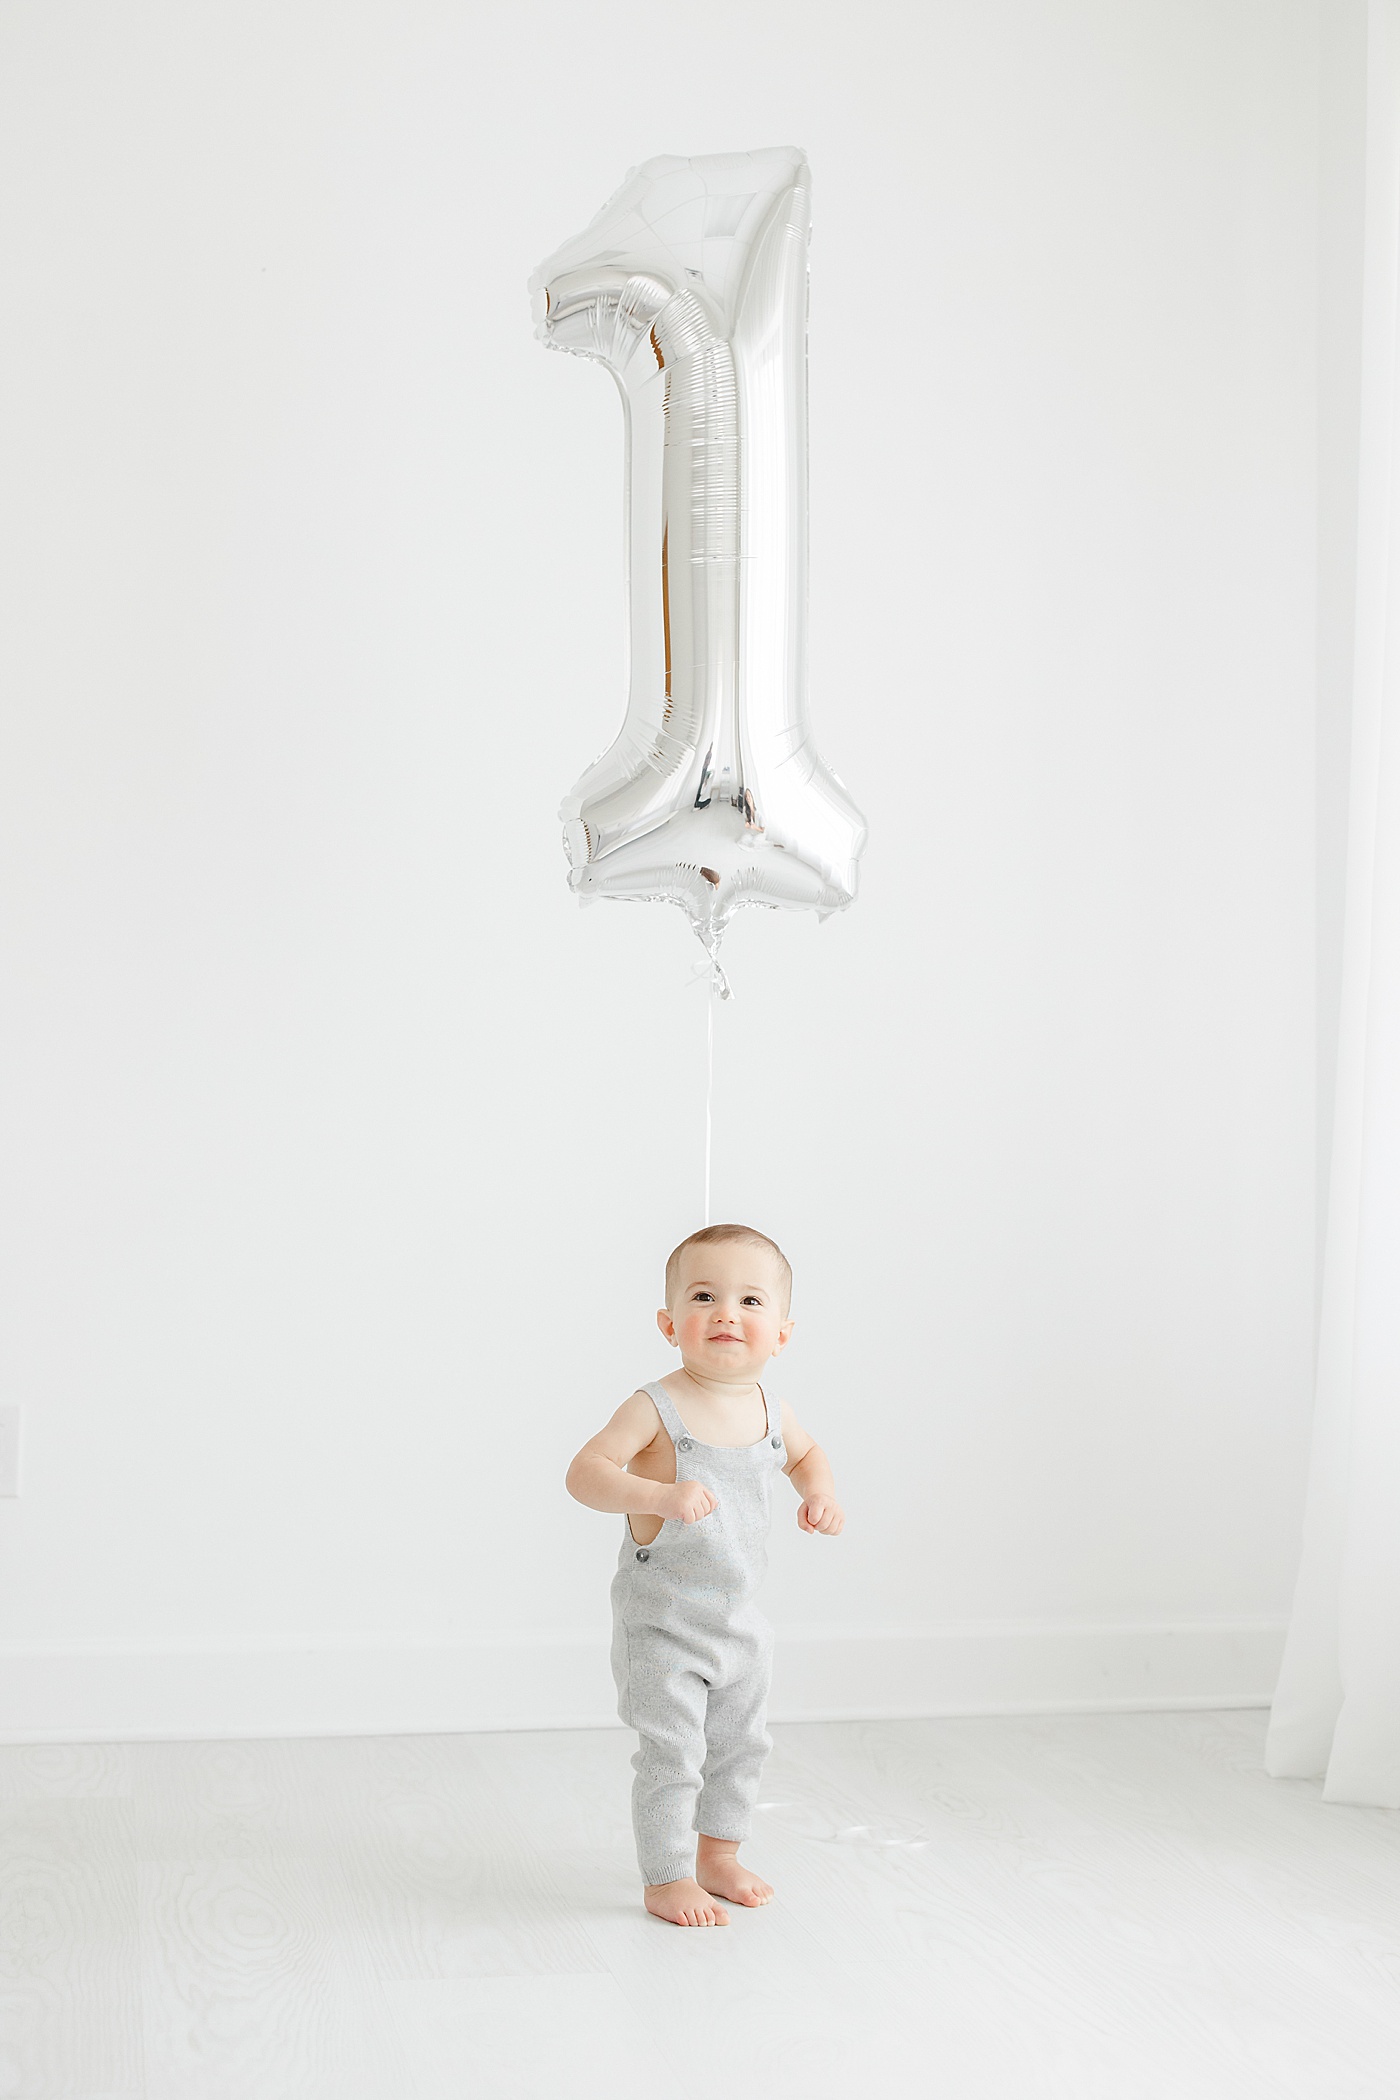 First birthday photoshoot with big ONE balloon in studio with Kristin Wood Photography.